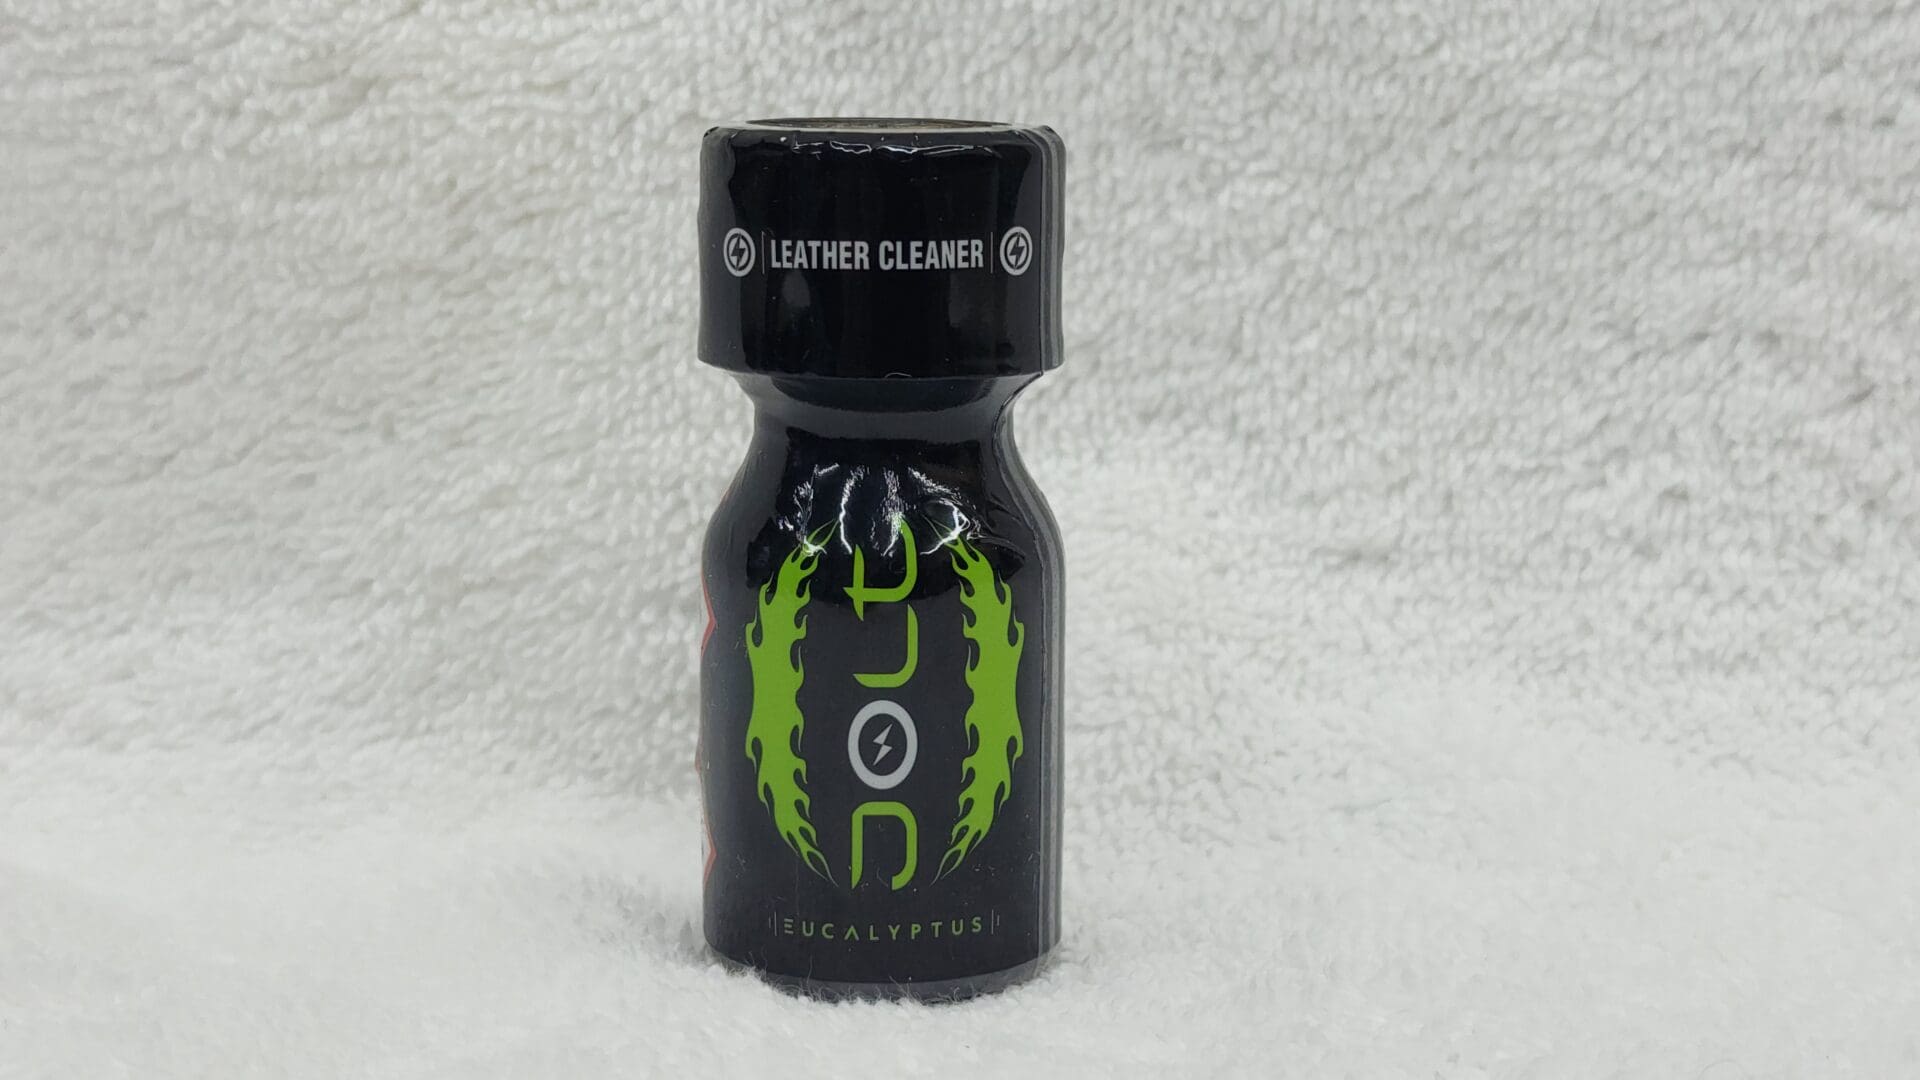 A bottle of Jolt Coconut labeled "eucalyptus leather cleaner" with a black cap and green flame designs on a white textured background.